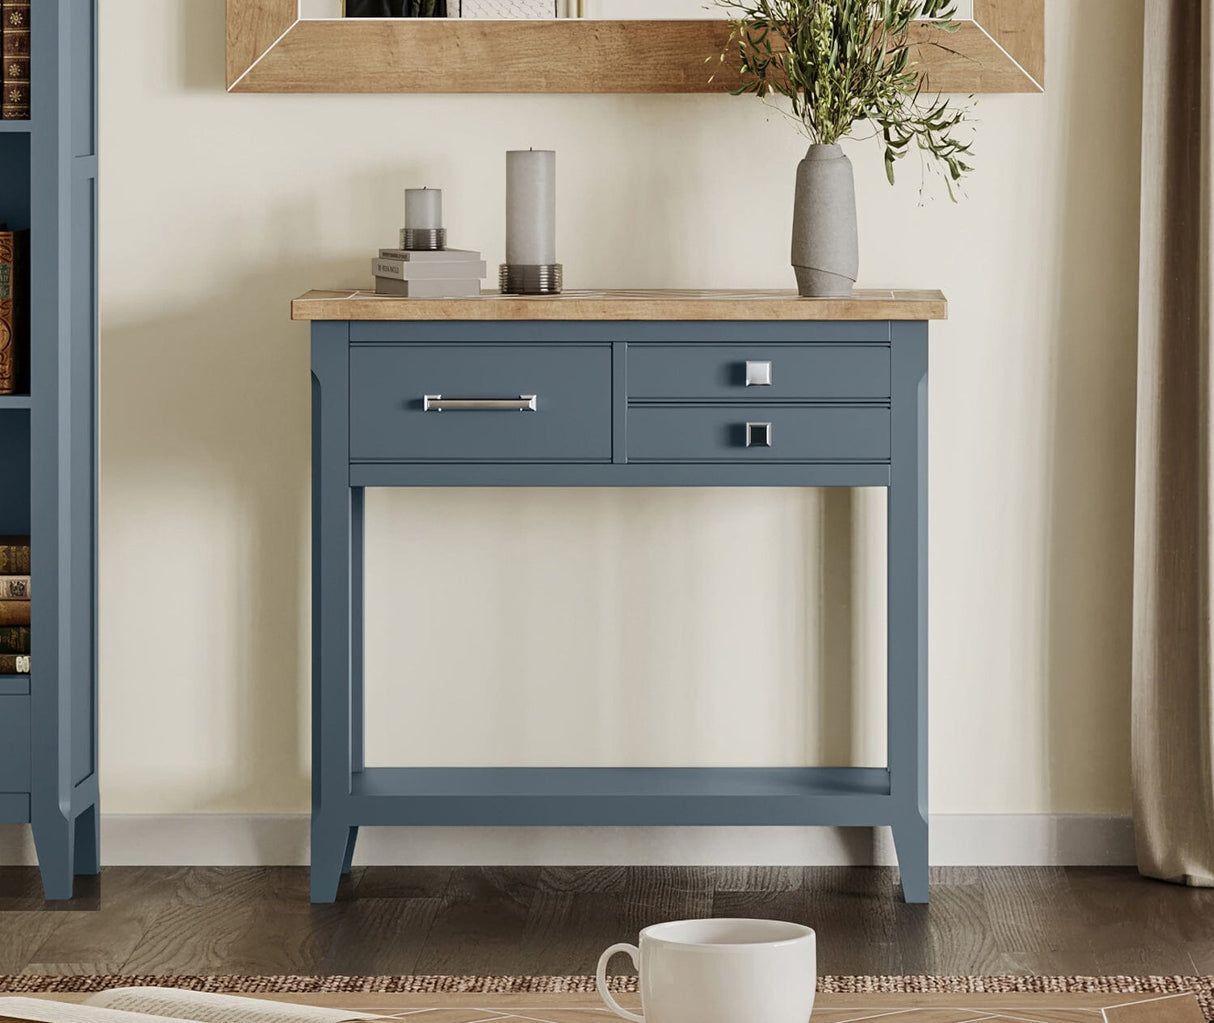 Baumhaus Signature Blue - Reclaimed Small Console Table (CFR02D)